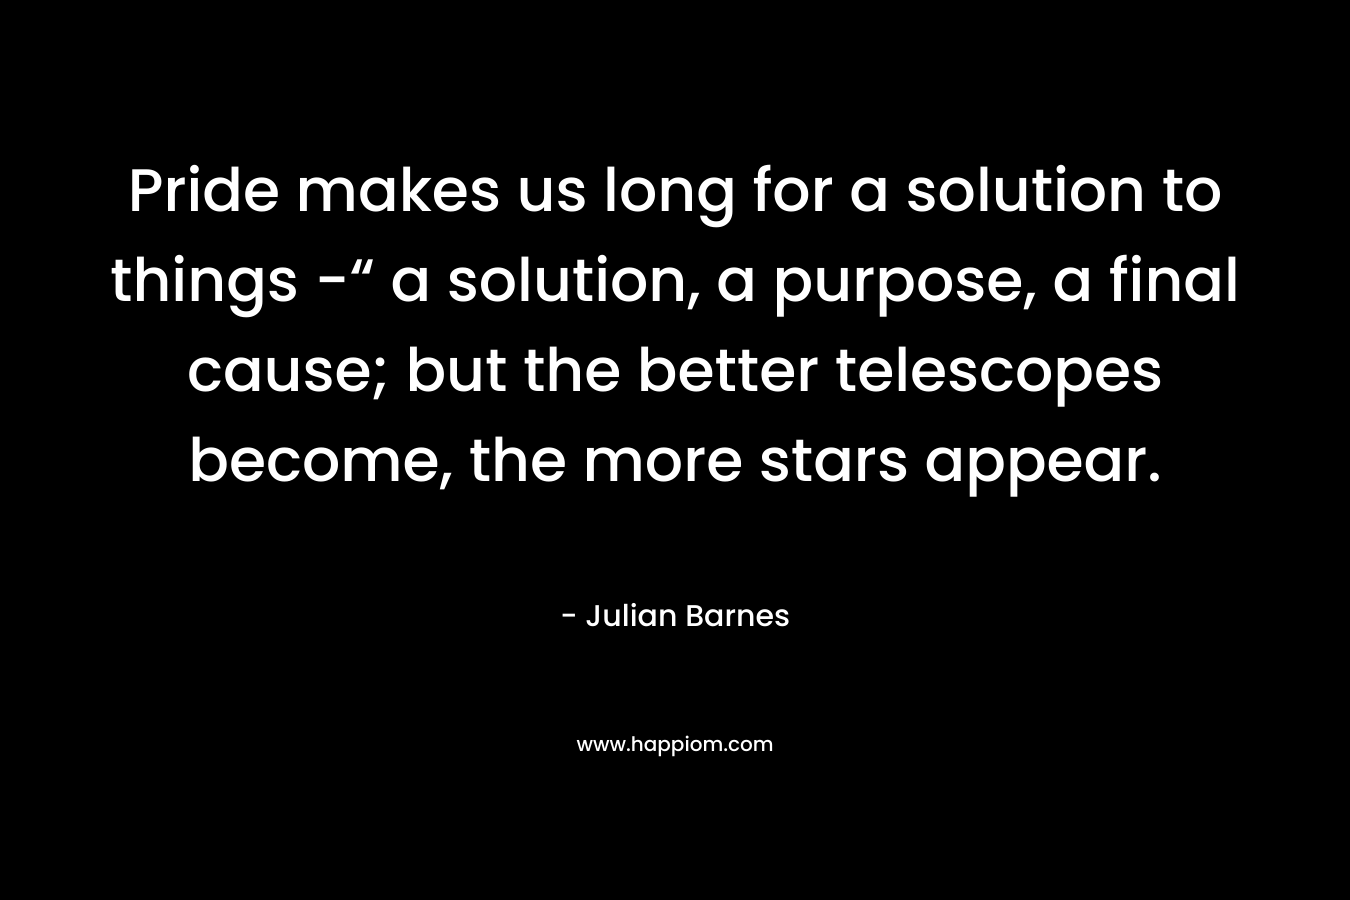 Pride makes us long for a solution to things -“ a solution, a purpose, a final cause; but the better telescopes become, the more stars appear.